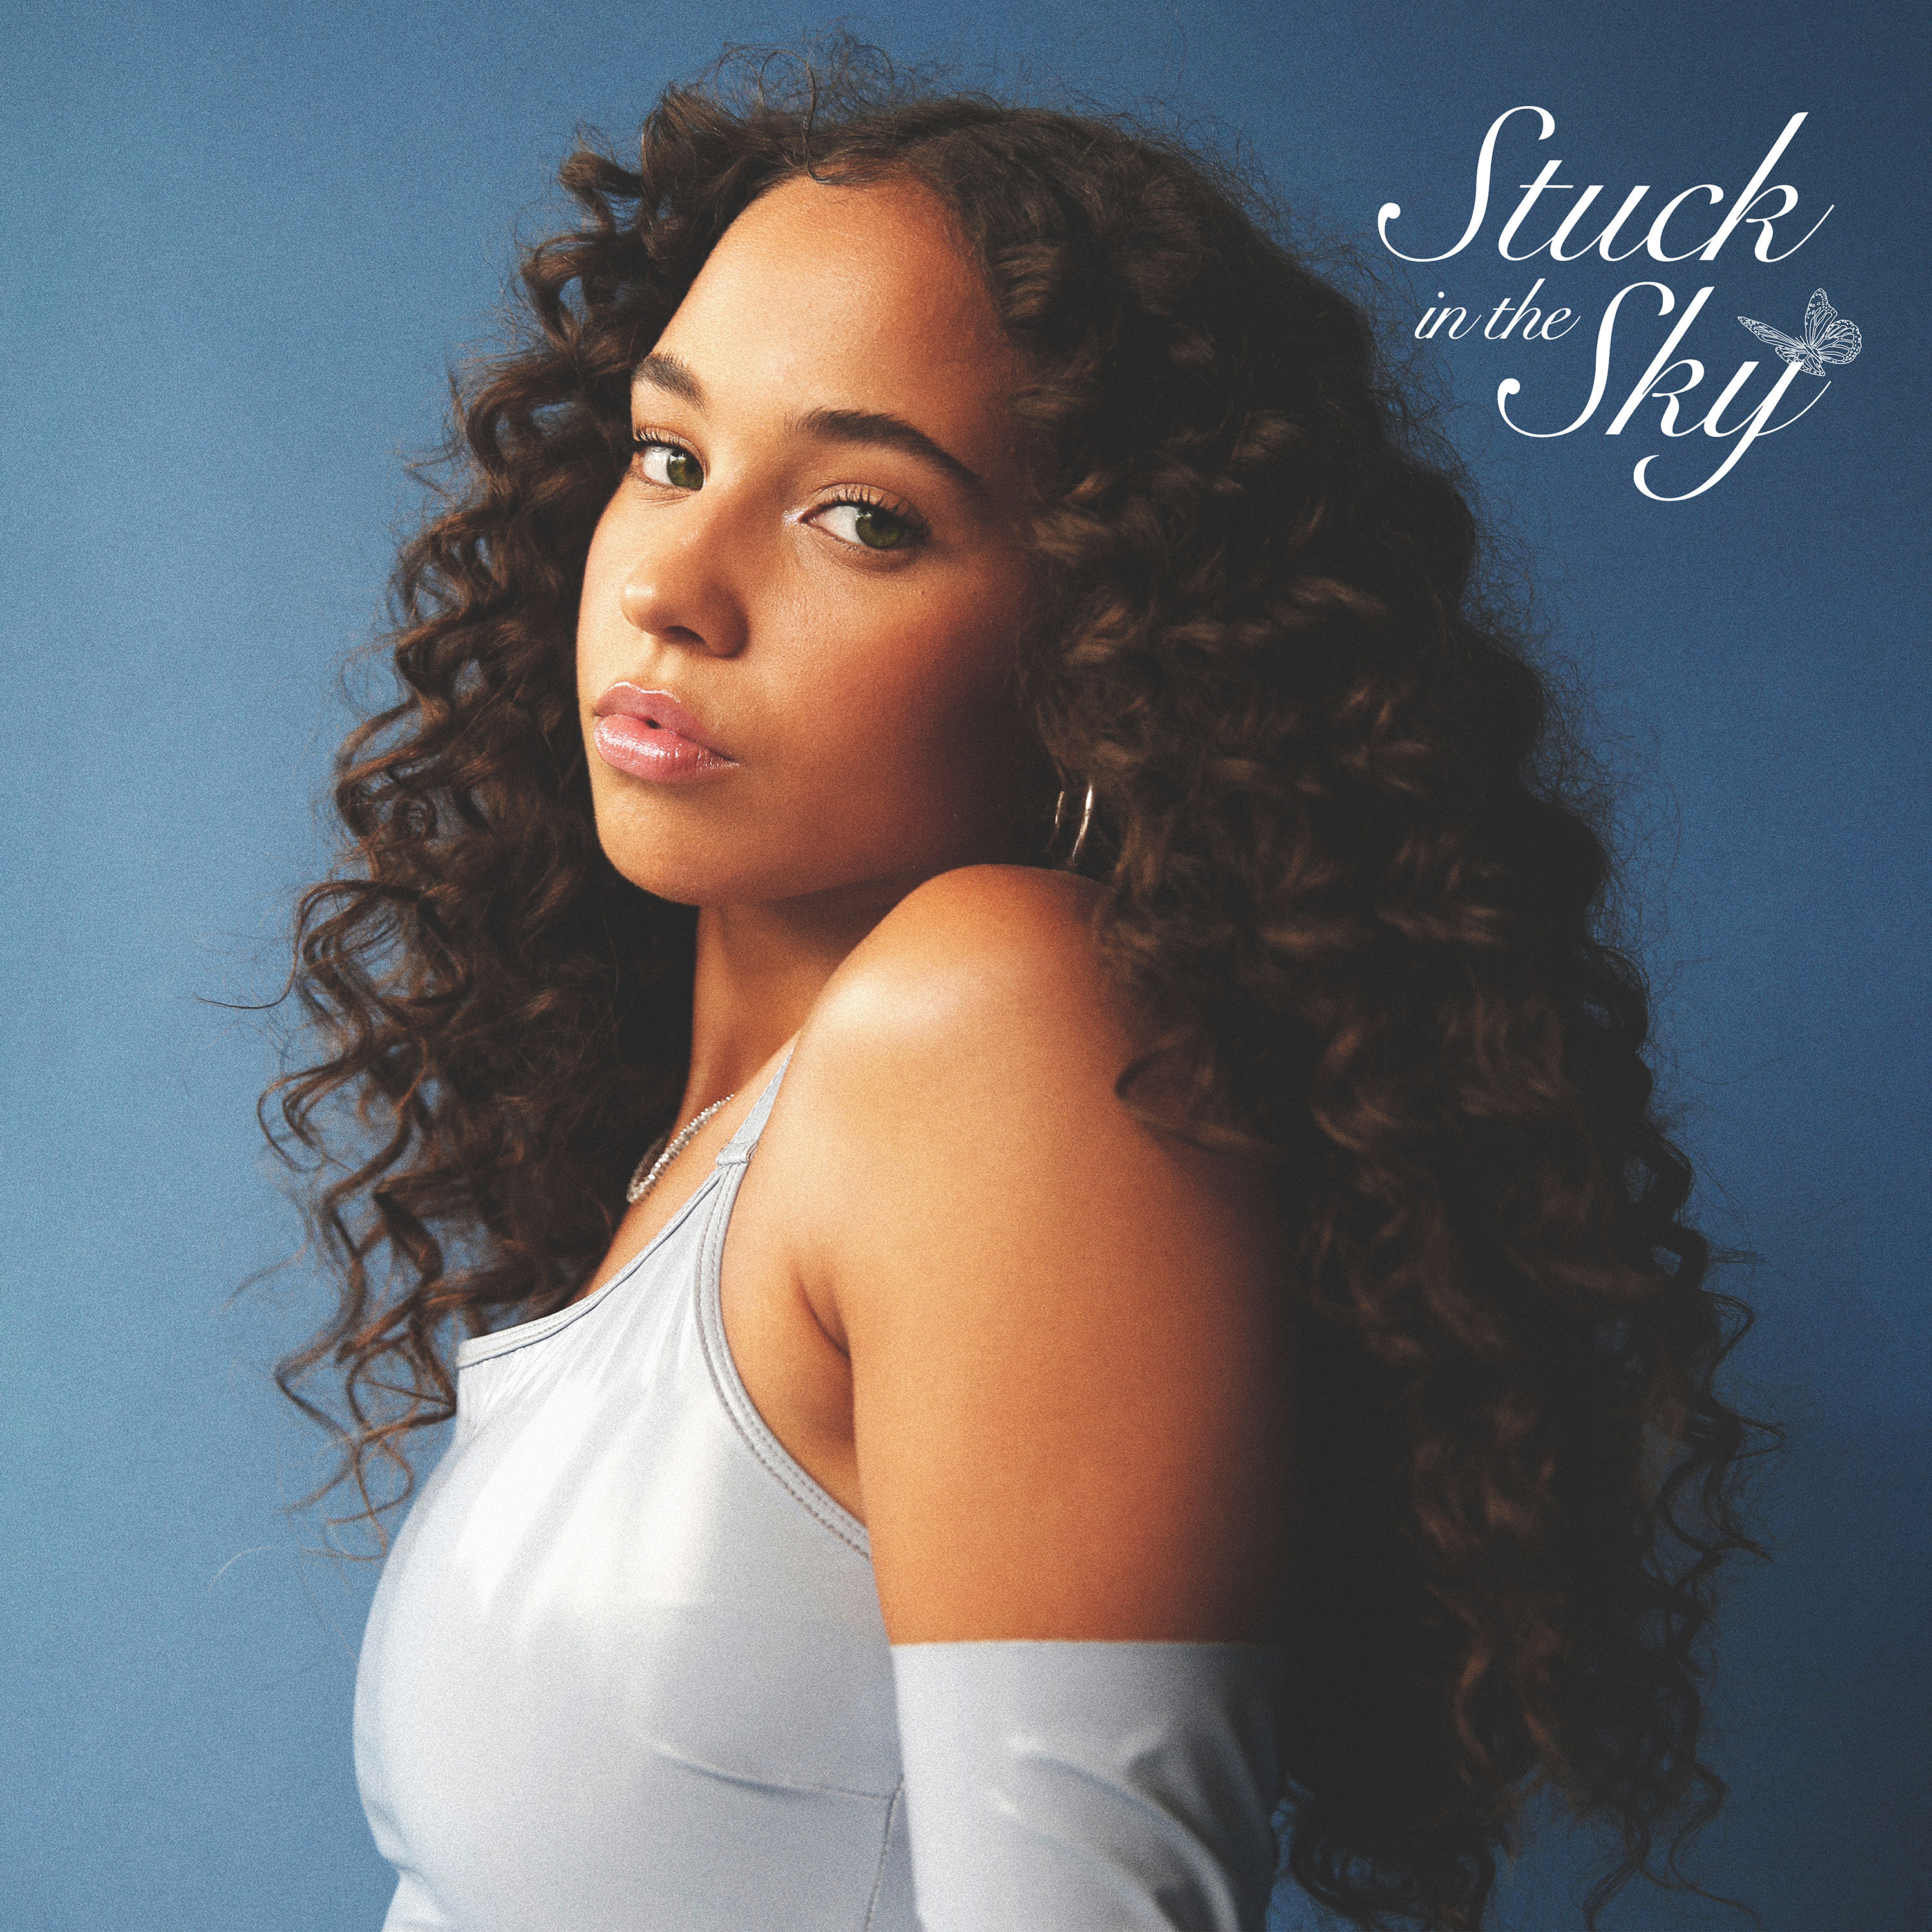 Maria Isabel – Stuck in the Sky (2020) [FLAC 24bit/44,1kHz]